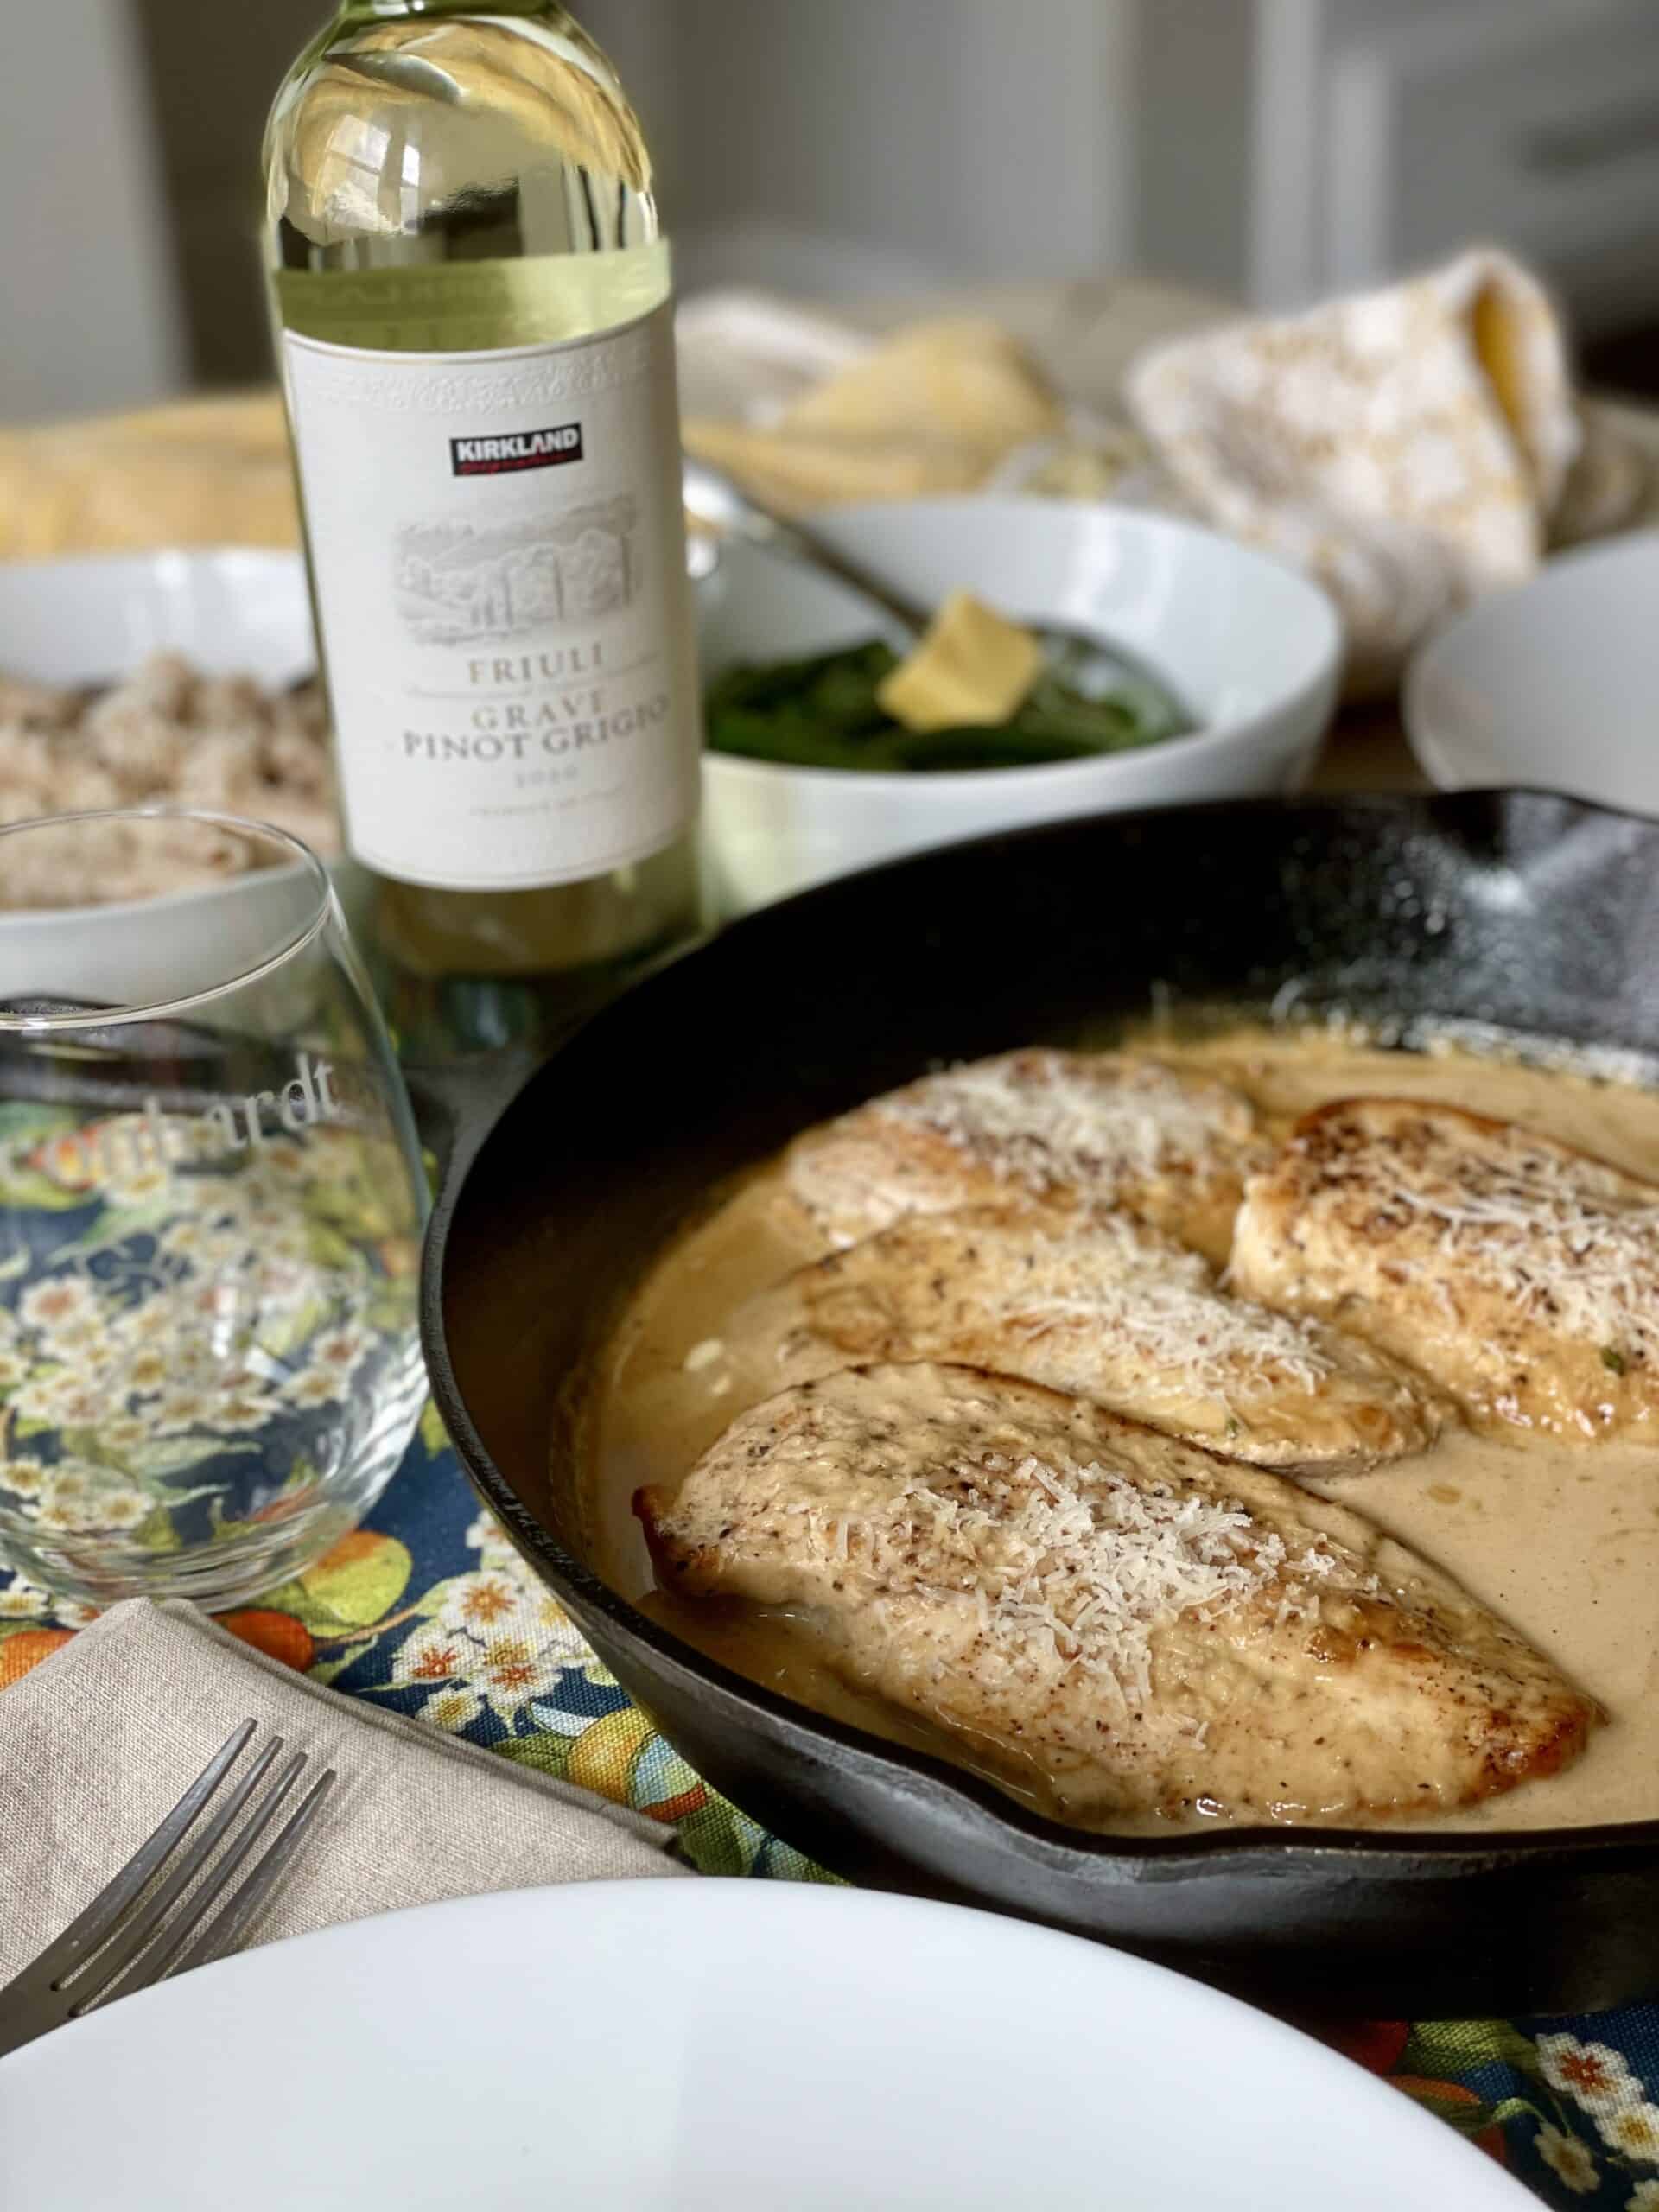 cast iron skillet with creamy lemon chicken set on a table with white plates wine glasses and a bottle of pinot grigio wine